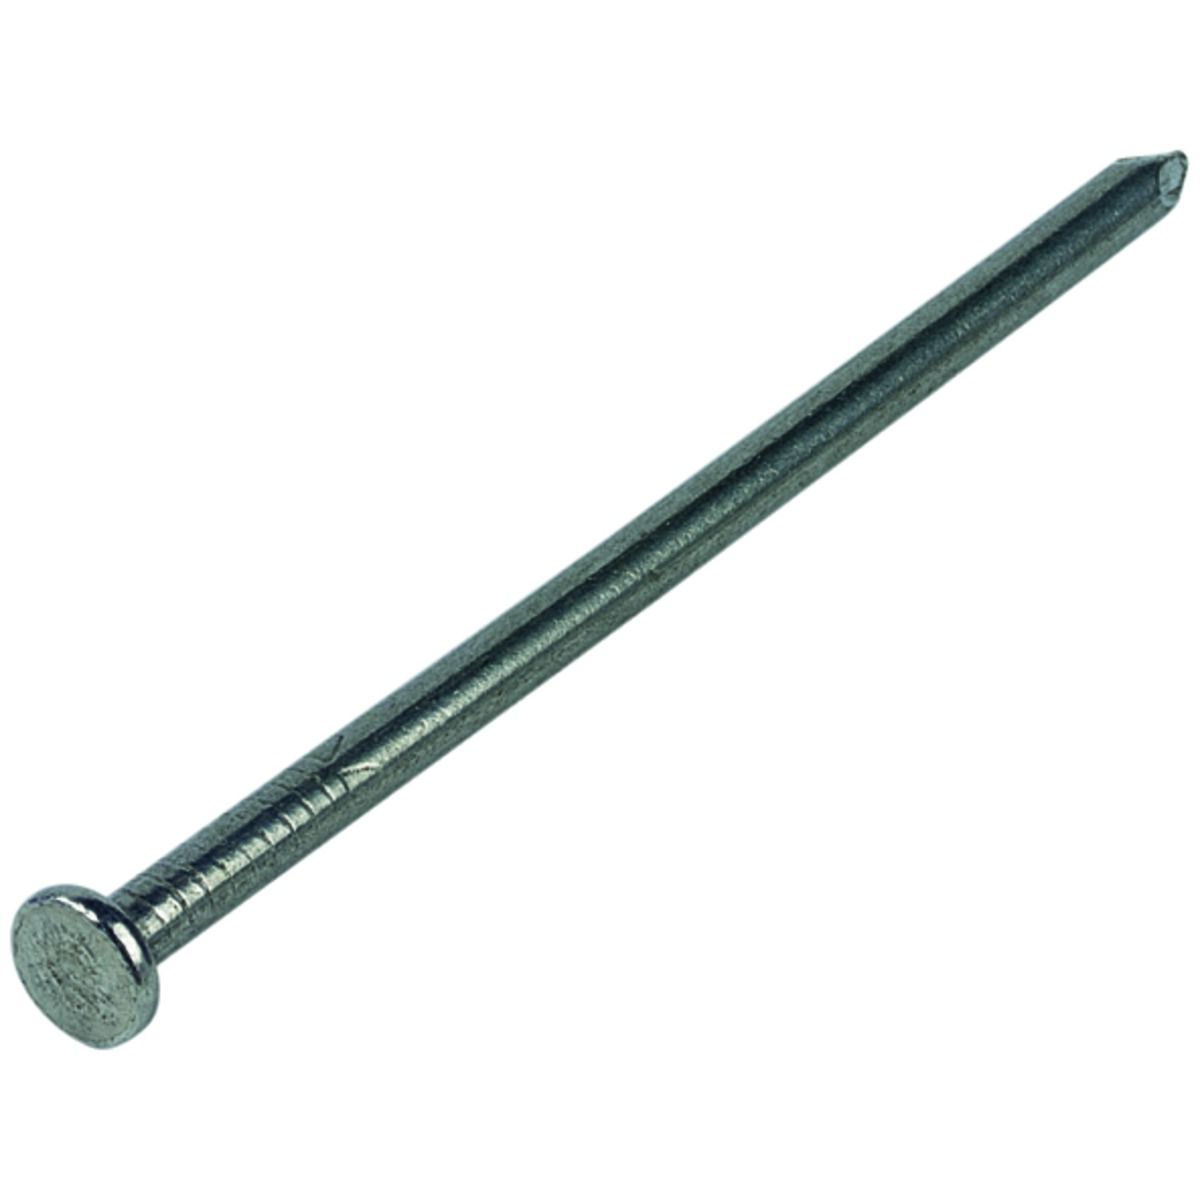 Image of Wickes 100mm Bright Round Wire Nails - 400g